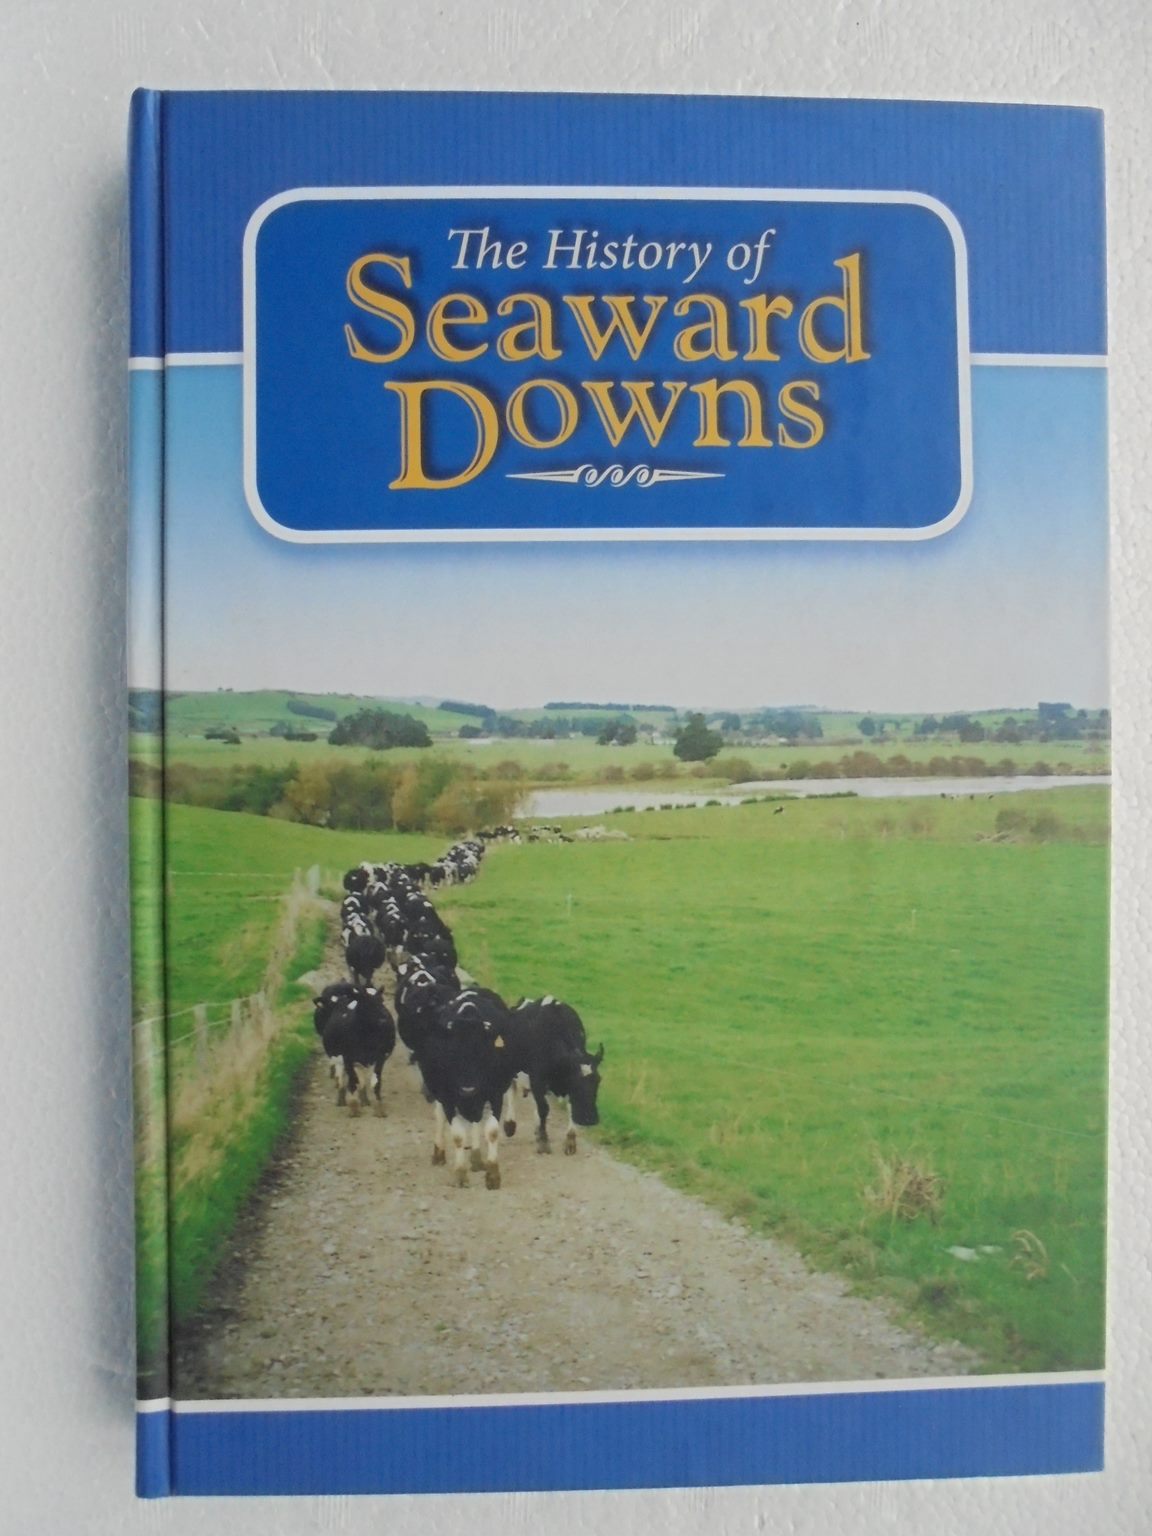 History Of Seaward Downs - by Agnes Thwaites. [First Edition]